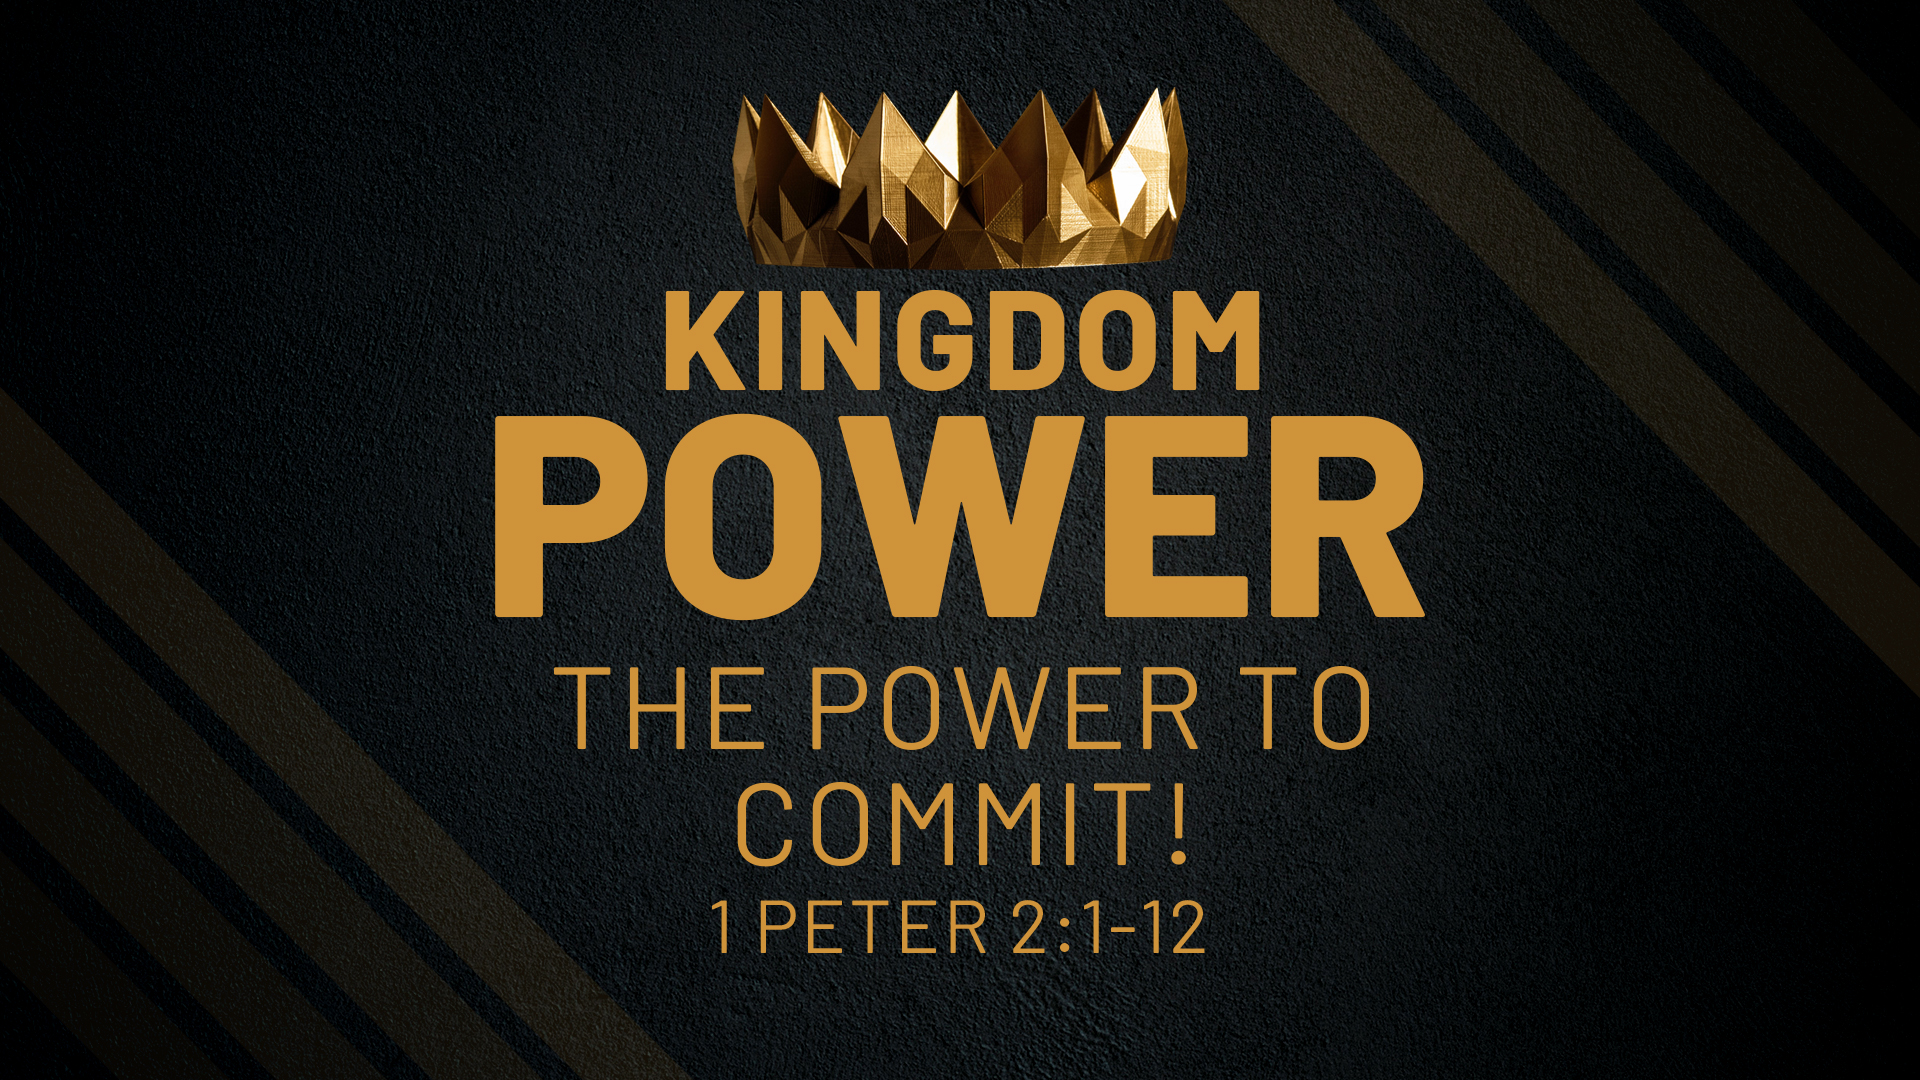 The Power to Commit!